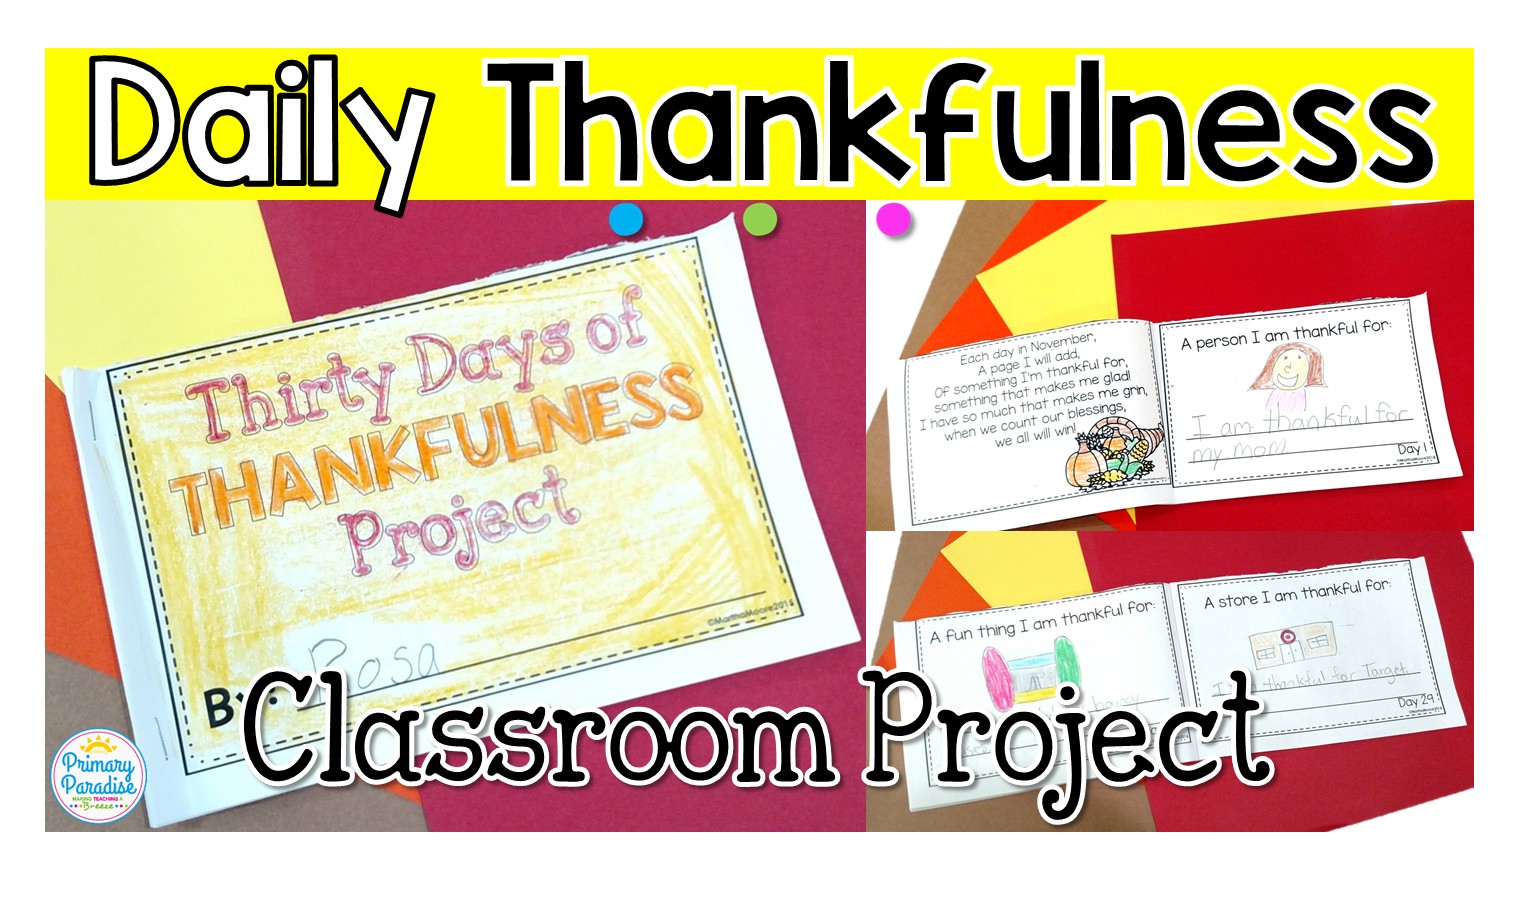 Thankful Students? Cultivating an Attitude of Gratitude